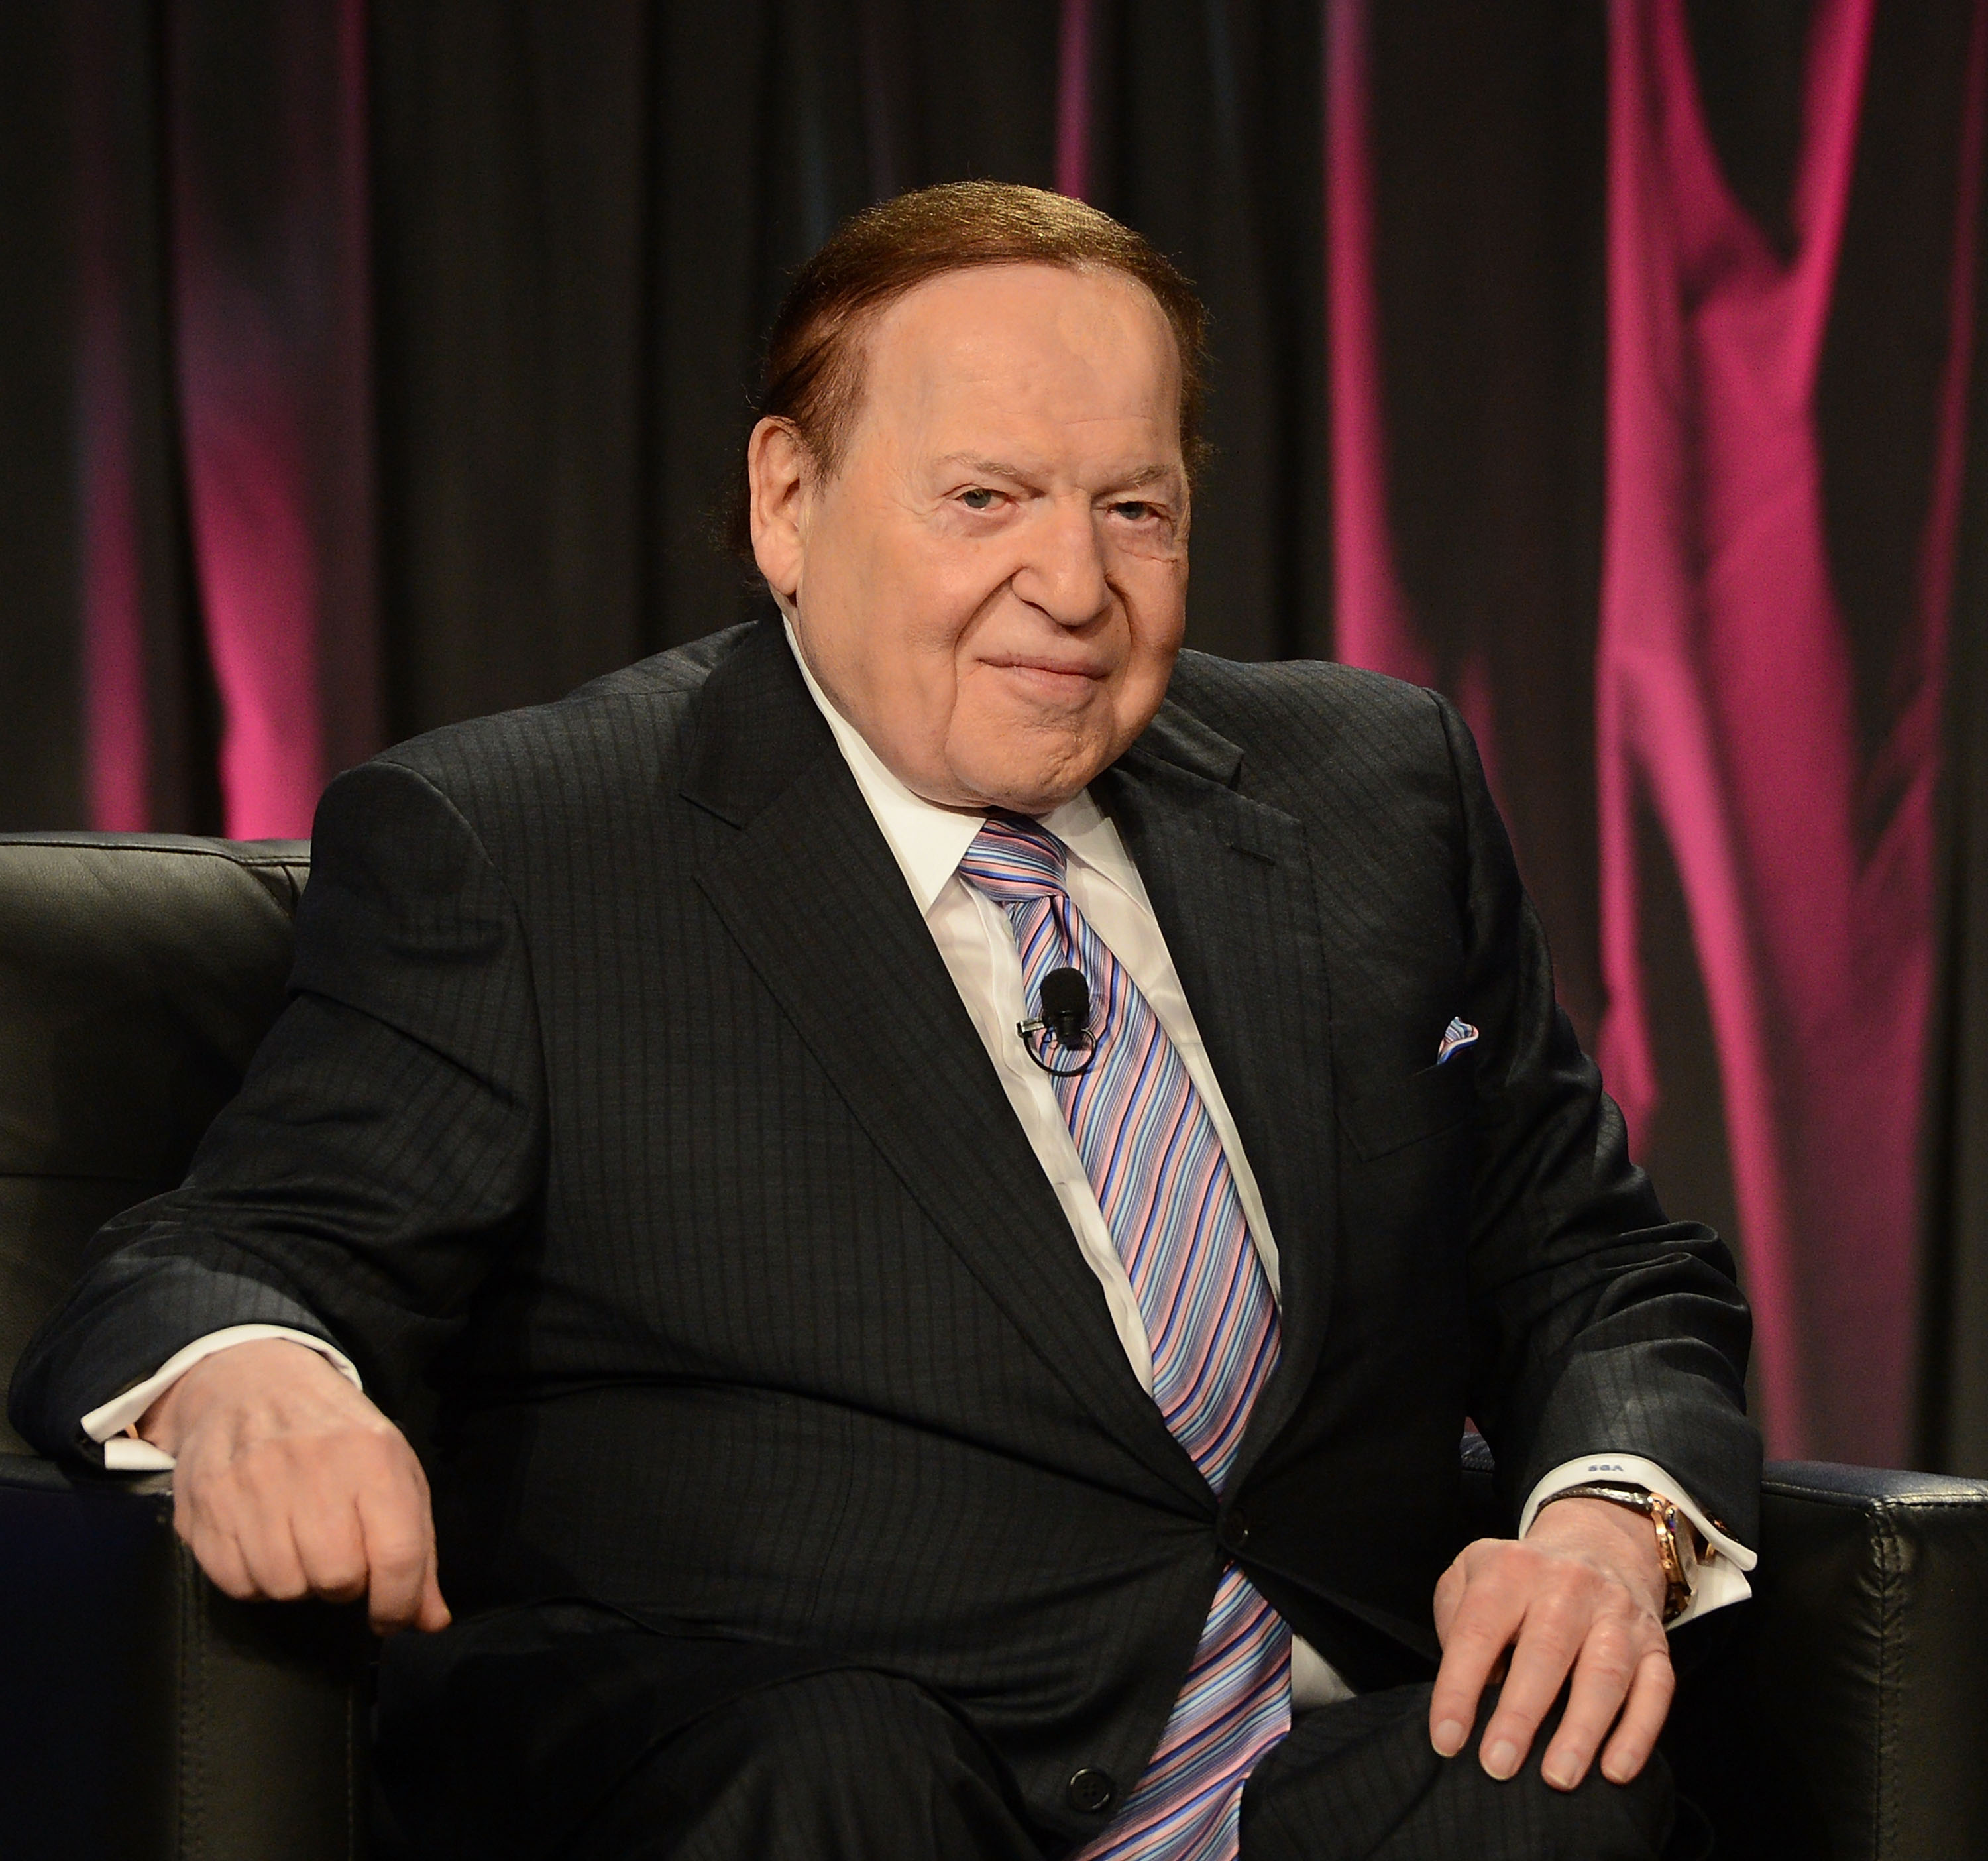 Chairman &amp; CEO of Las Vegas Sands Corp., Sheldon Adelson speaks at the Exclusive Seminar: Keynote at the 14th Annual Global Gaming Expo at the Sands Expo and Convention Center on Oct. 1, 2014 in Las Vegas. (Denise Truscello—Getty Images for Global Gaming Expo)